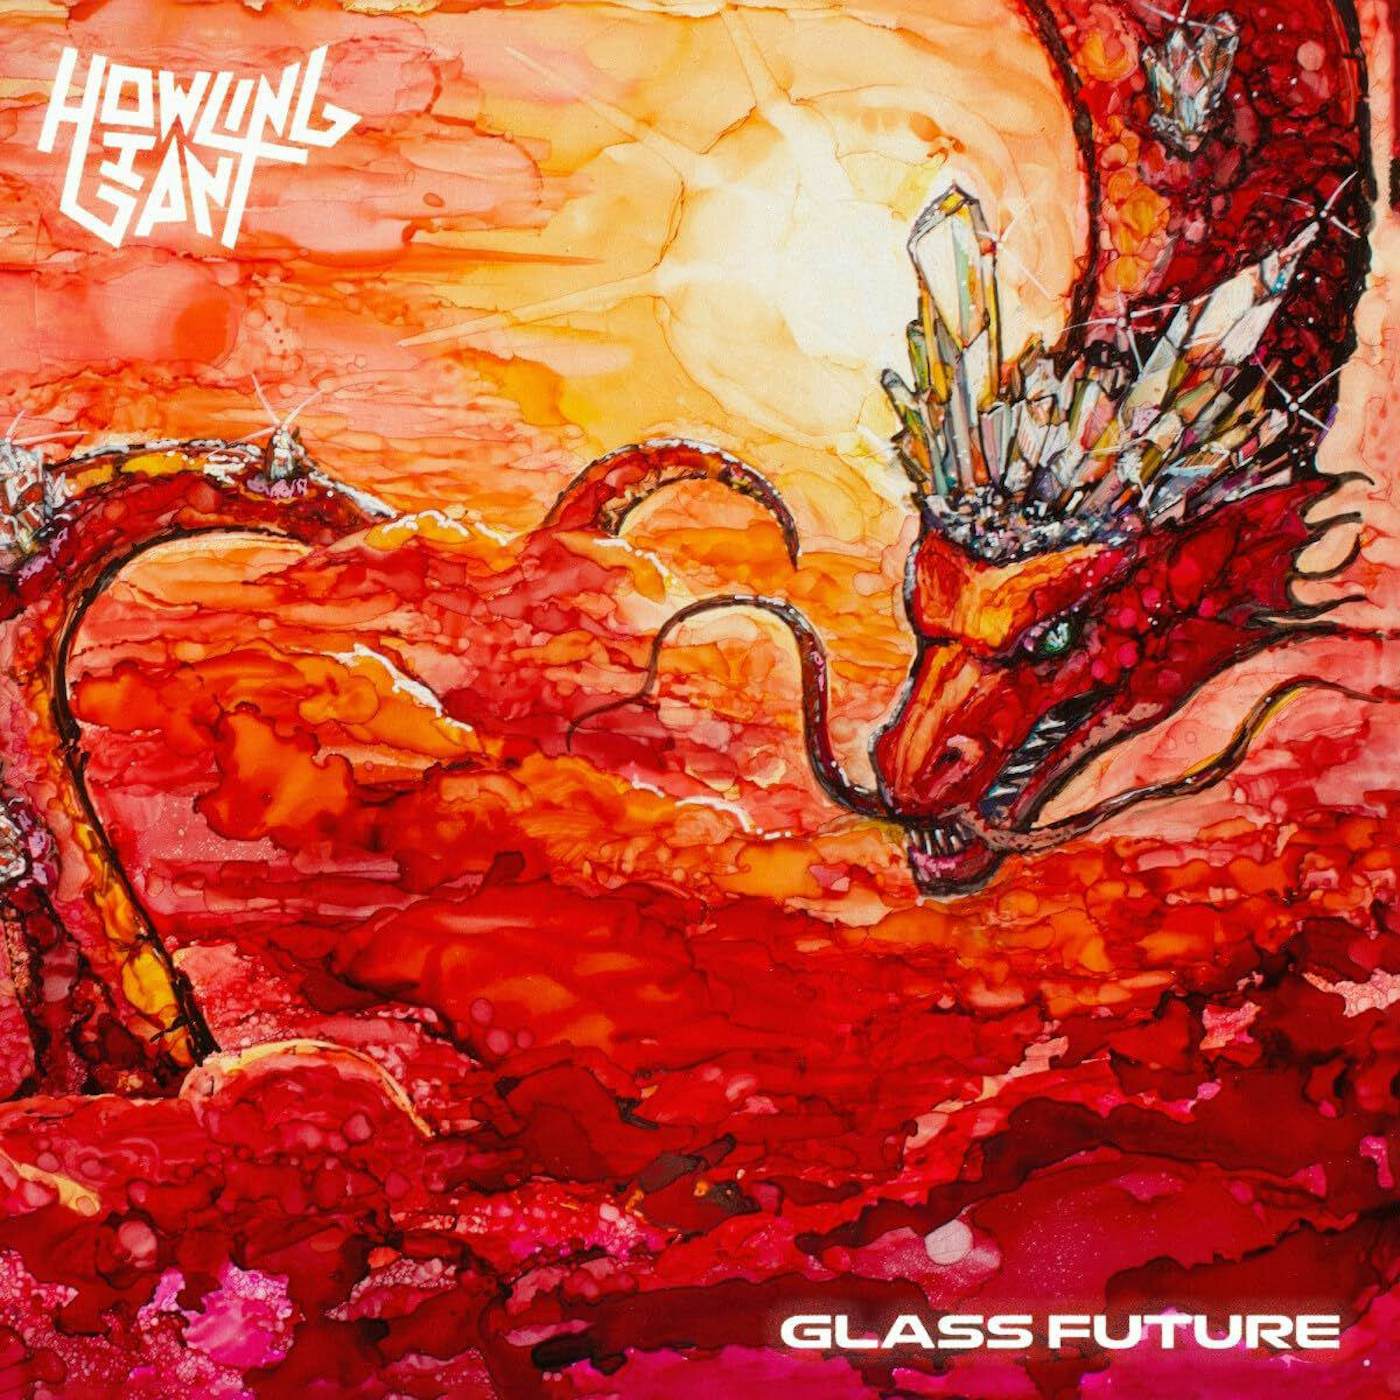 Howling Giant Glass Future (Red) Vinyl Record